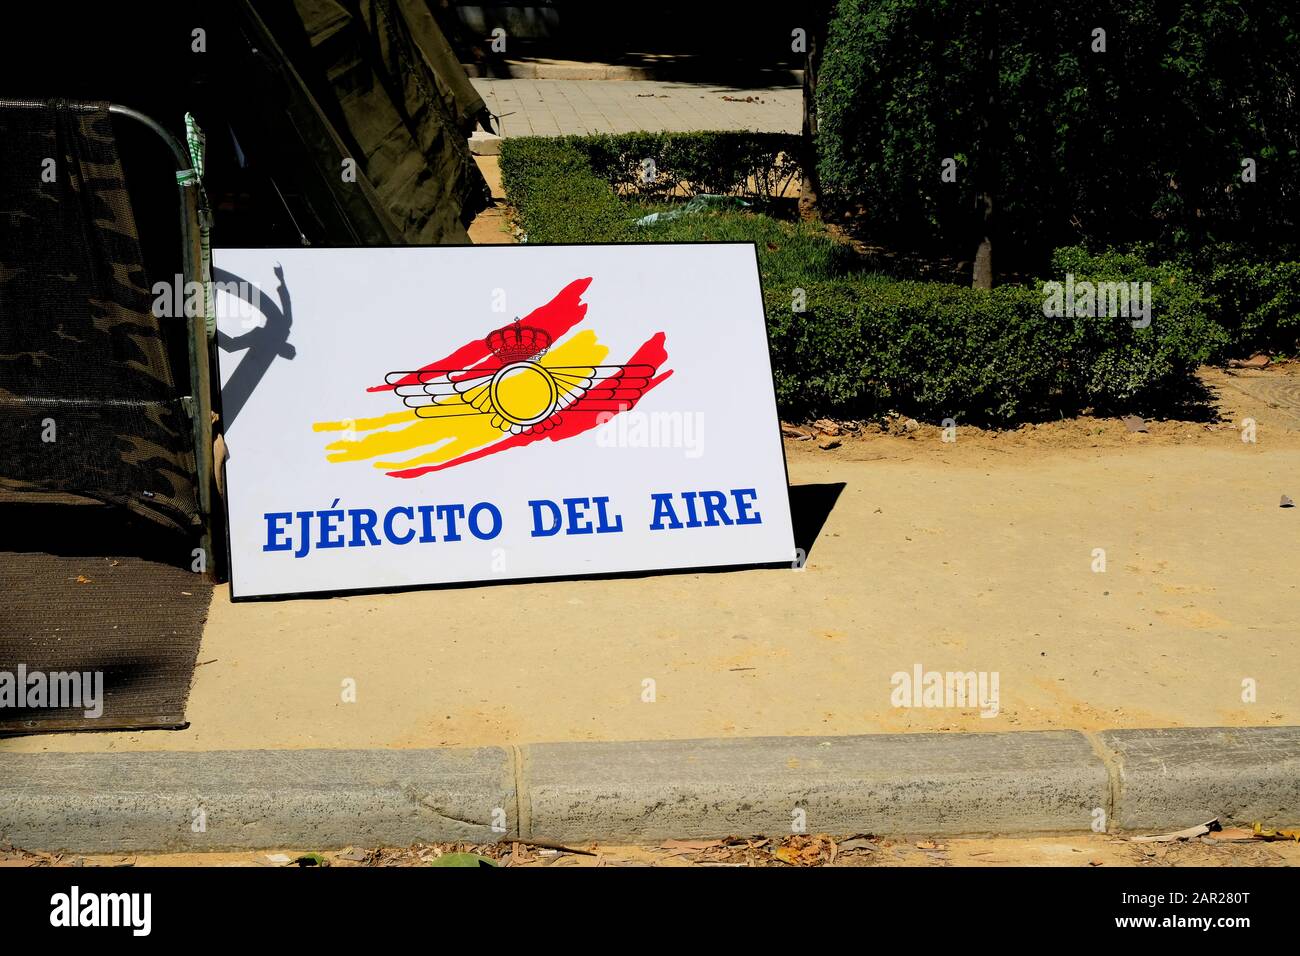 Ejército del Aire sign, for the Spanish air force, at the Armed Forces Day celebration in Sevilla, Spain on June 1, 2019 Stock Photo